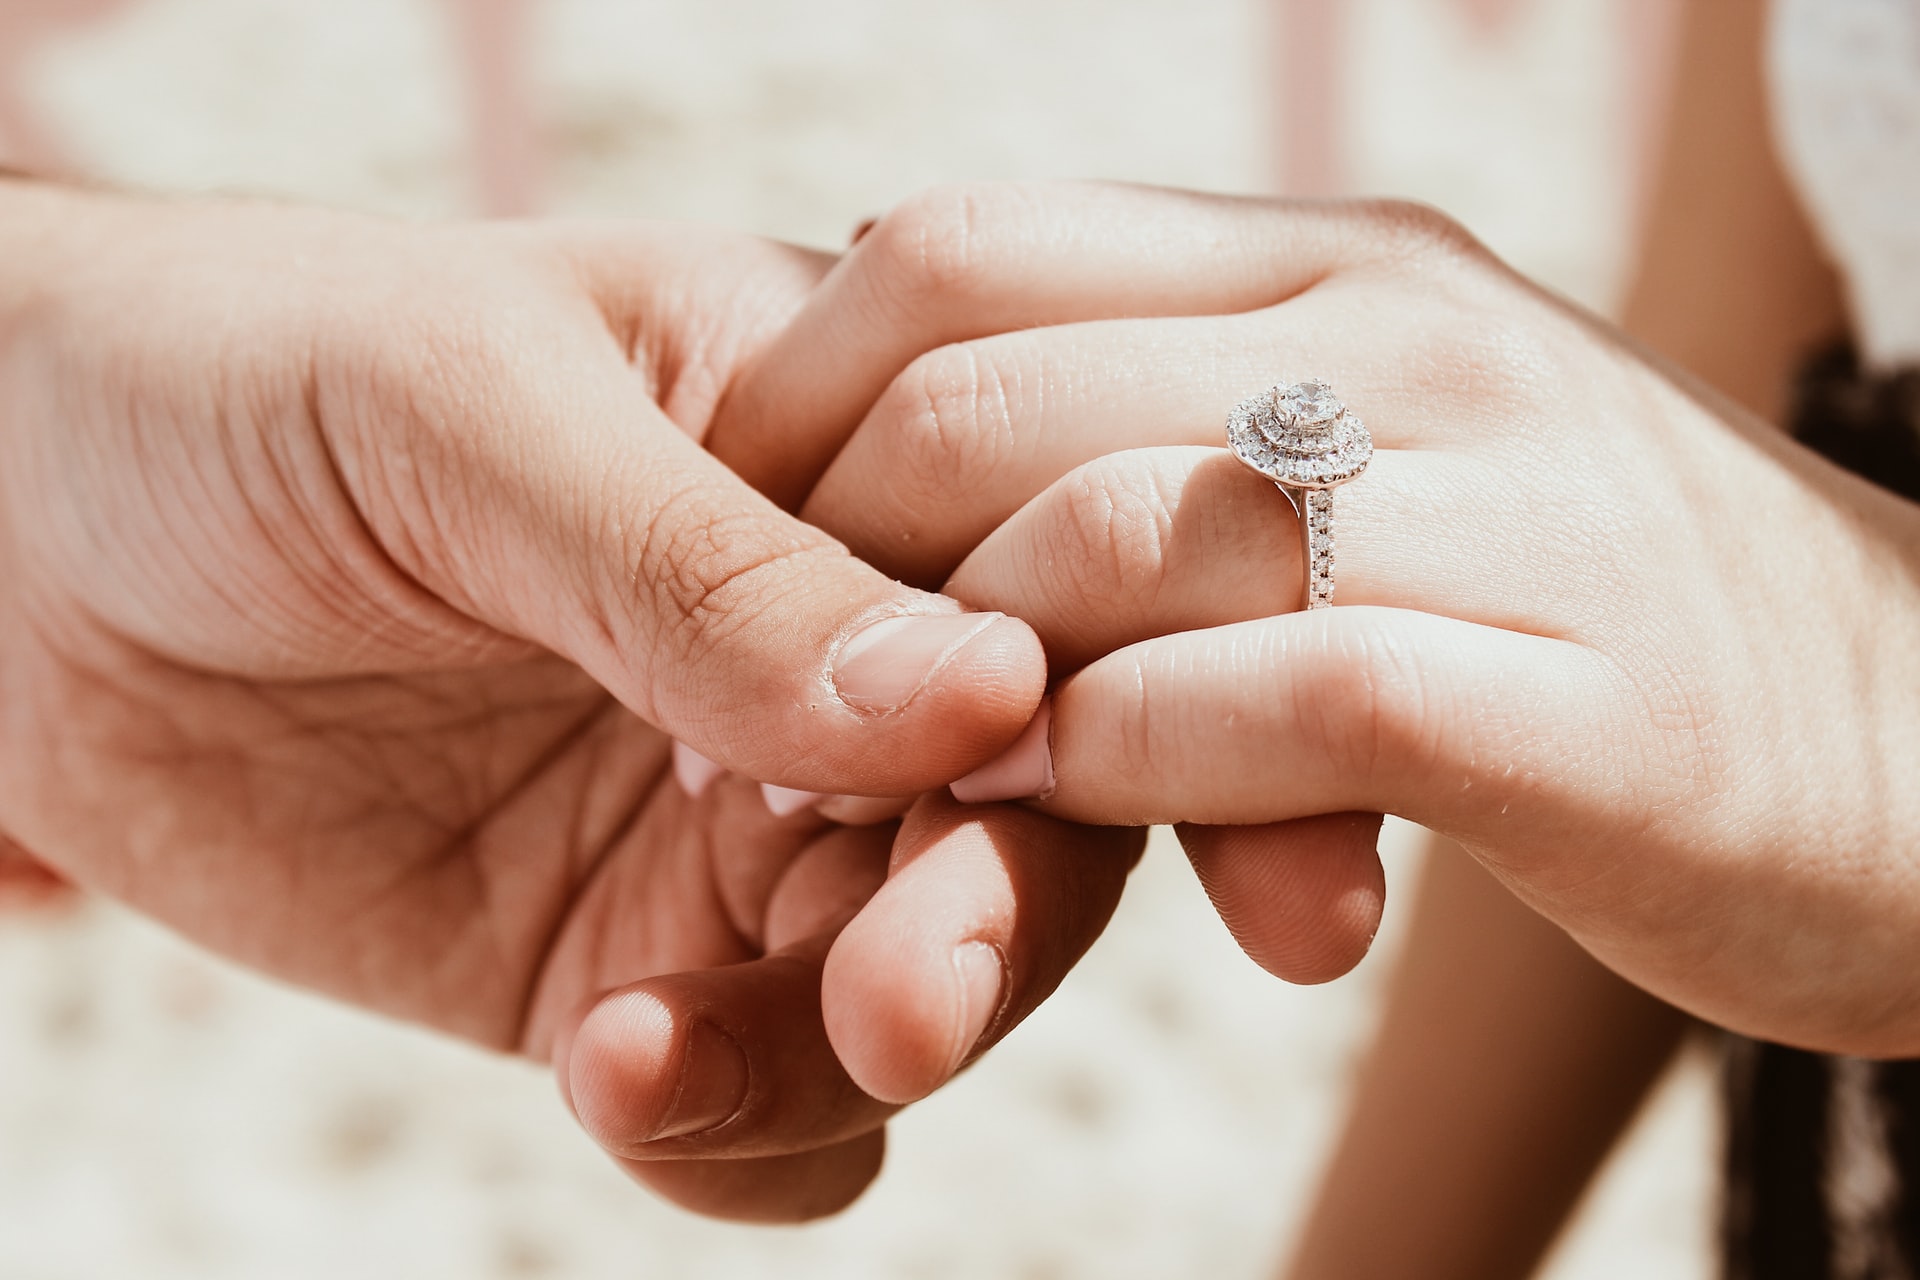 Bezel Vs. Prong Setting: Which Is Better for Lab Grown Diamond Engagement Rings?